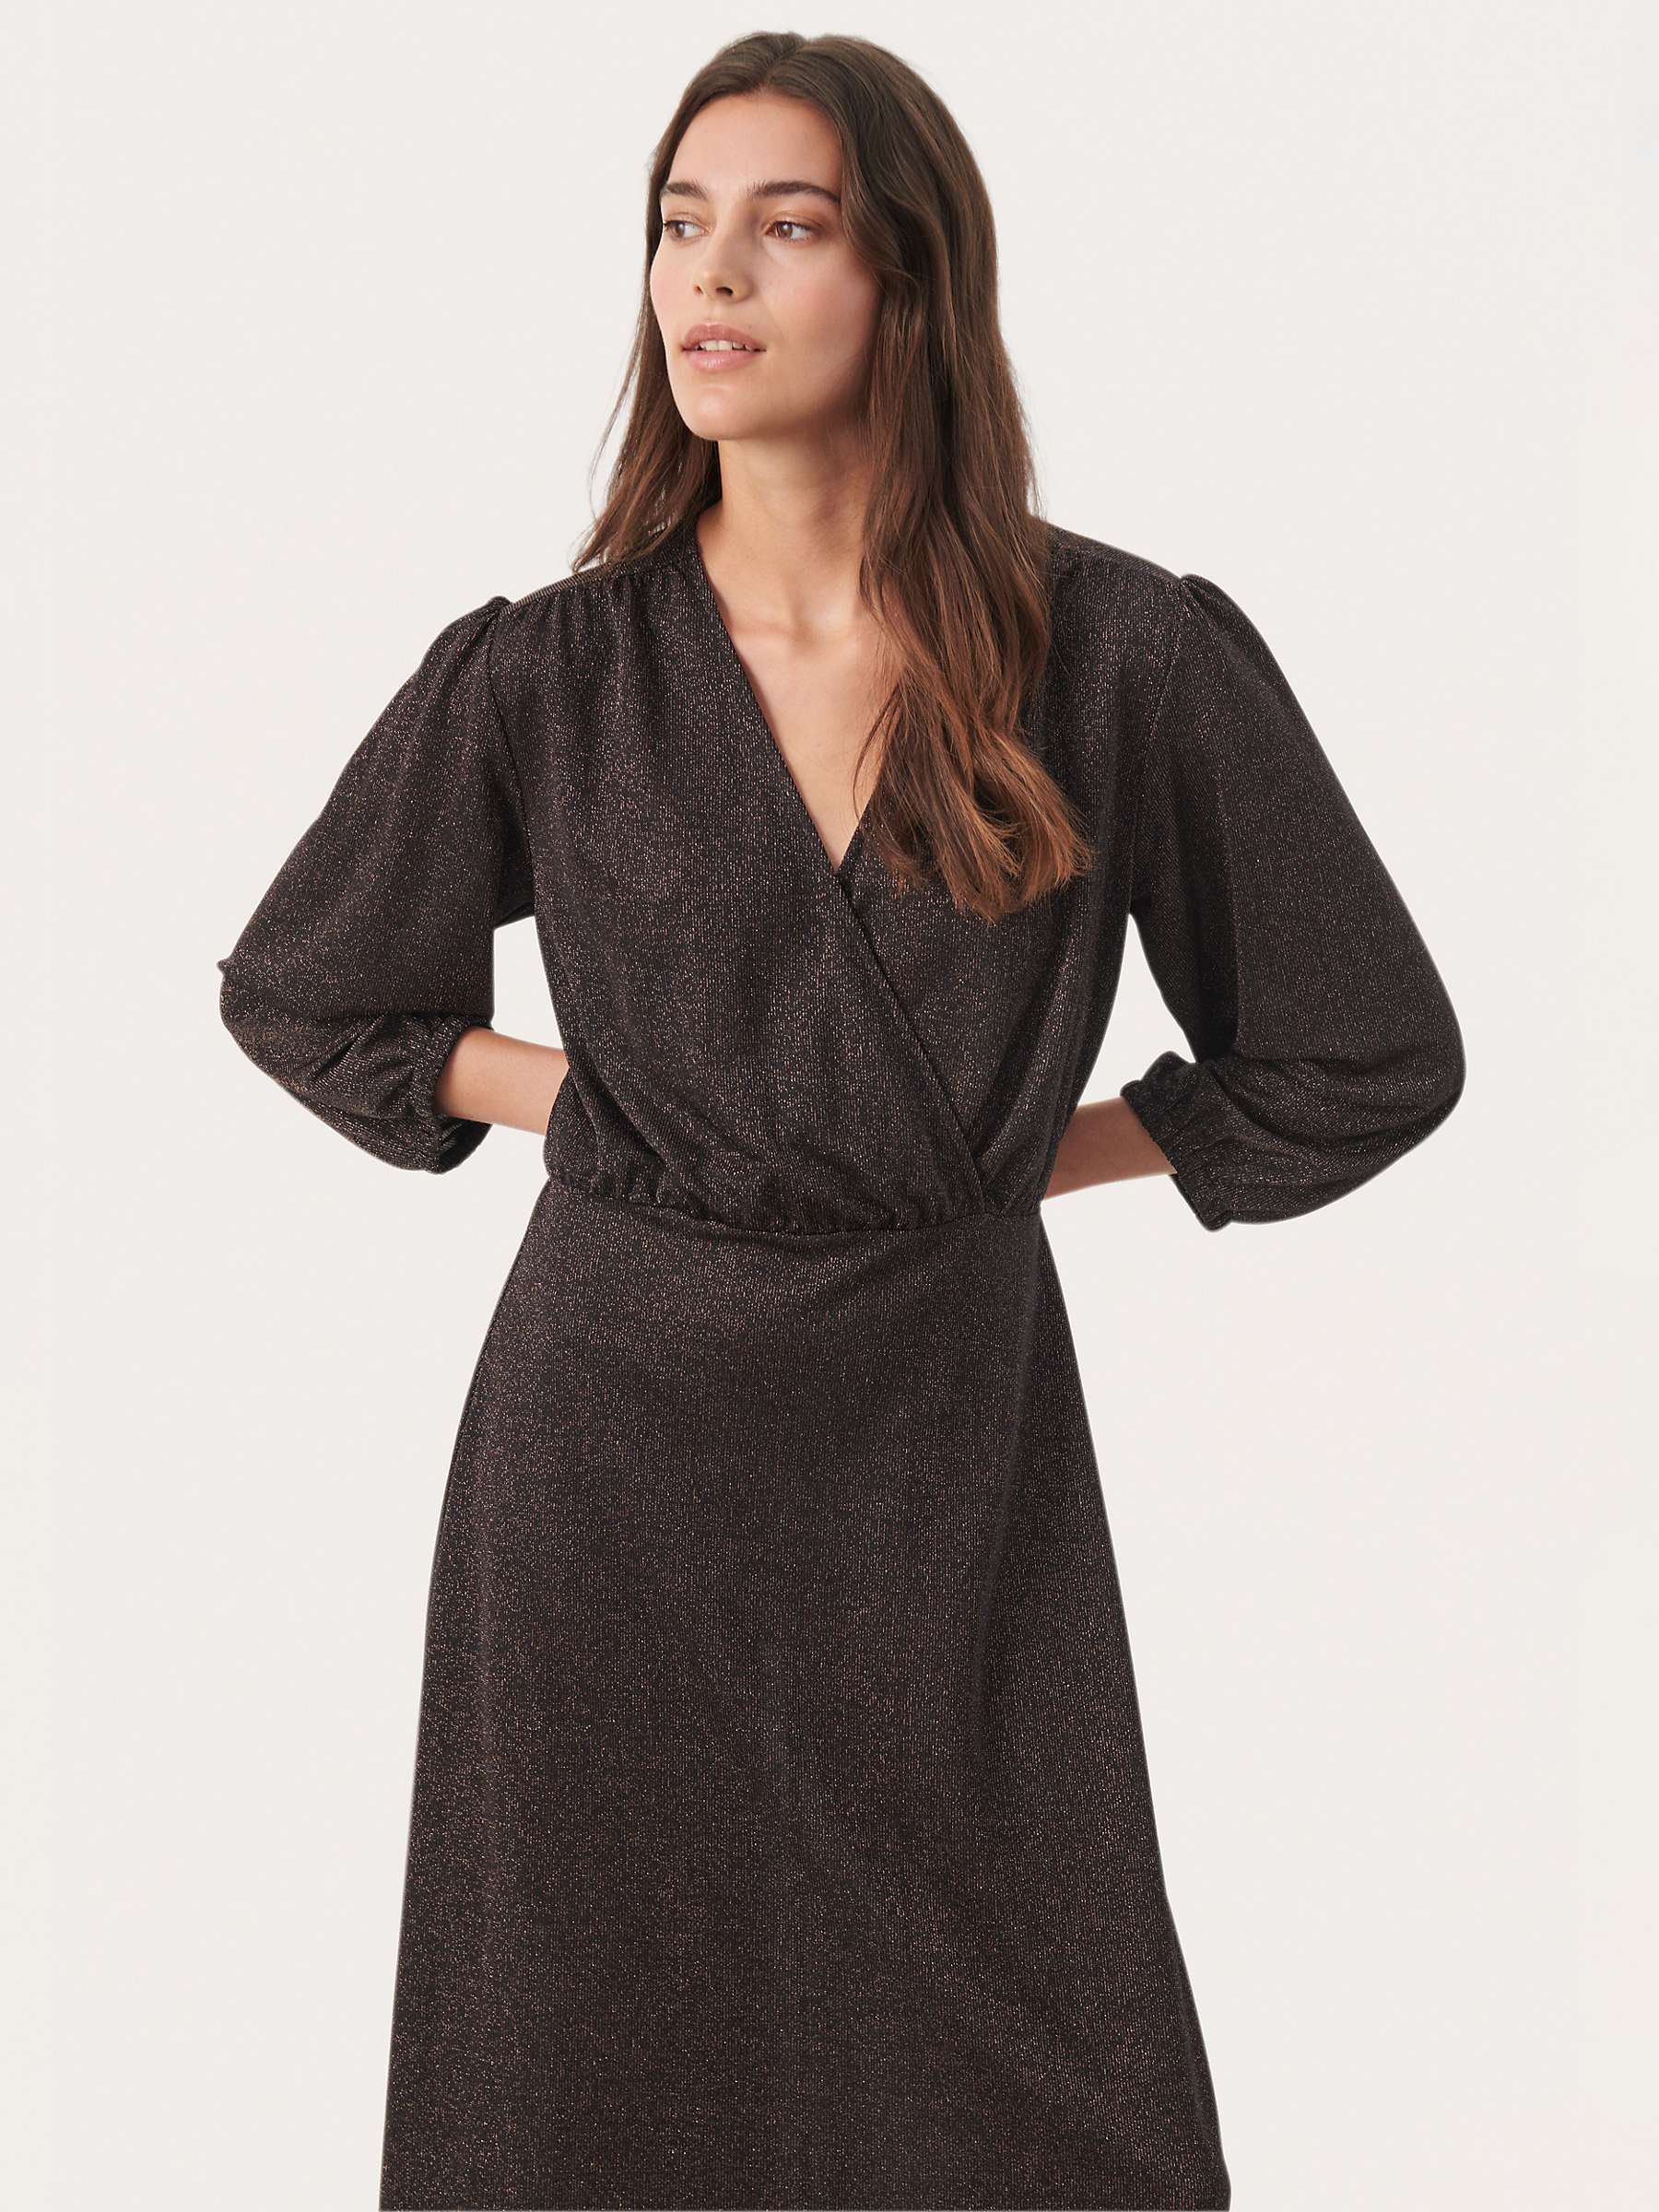 Buy Part Two Dalmine 3/4 Sleeve Glitter Wrap Maxi Dress Online at johnlewis.com